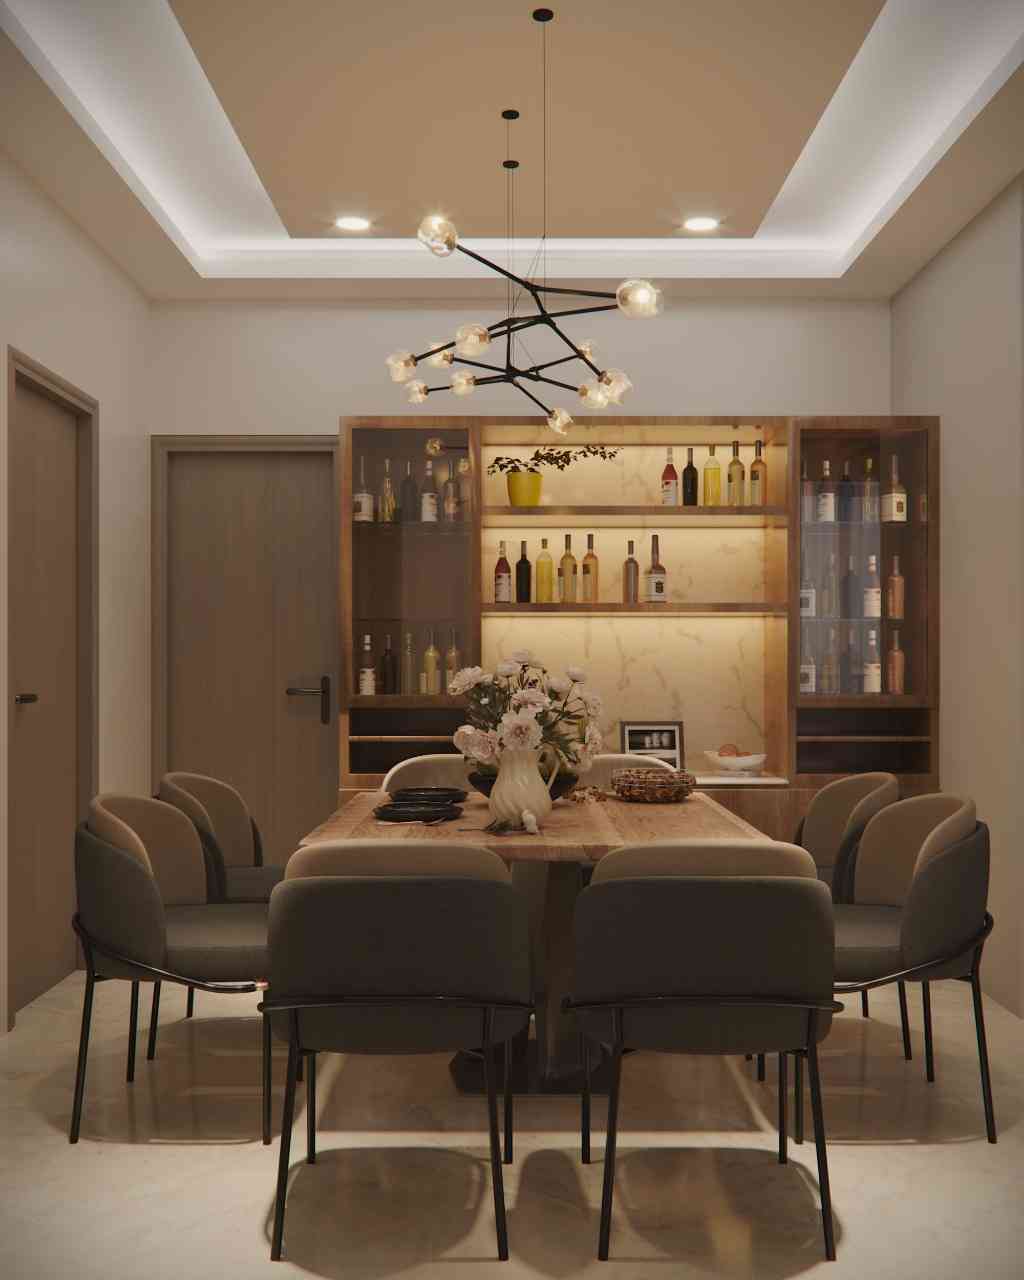 Dining Room Design With Cabinet For Displaying Beverages